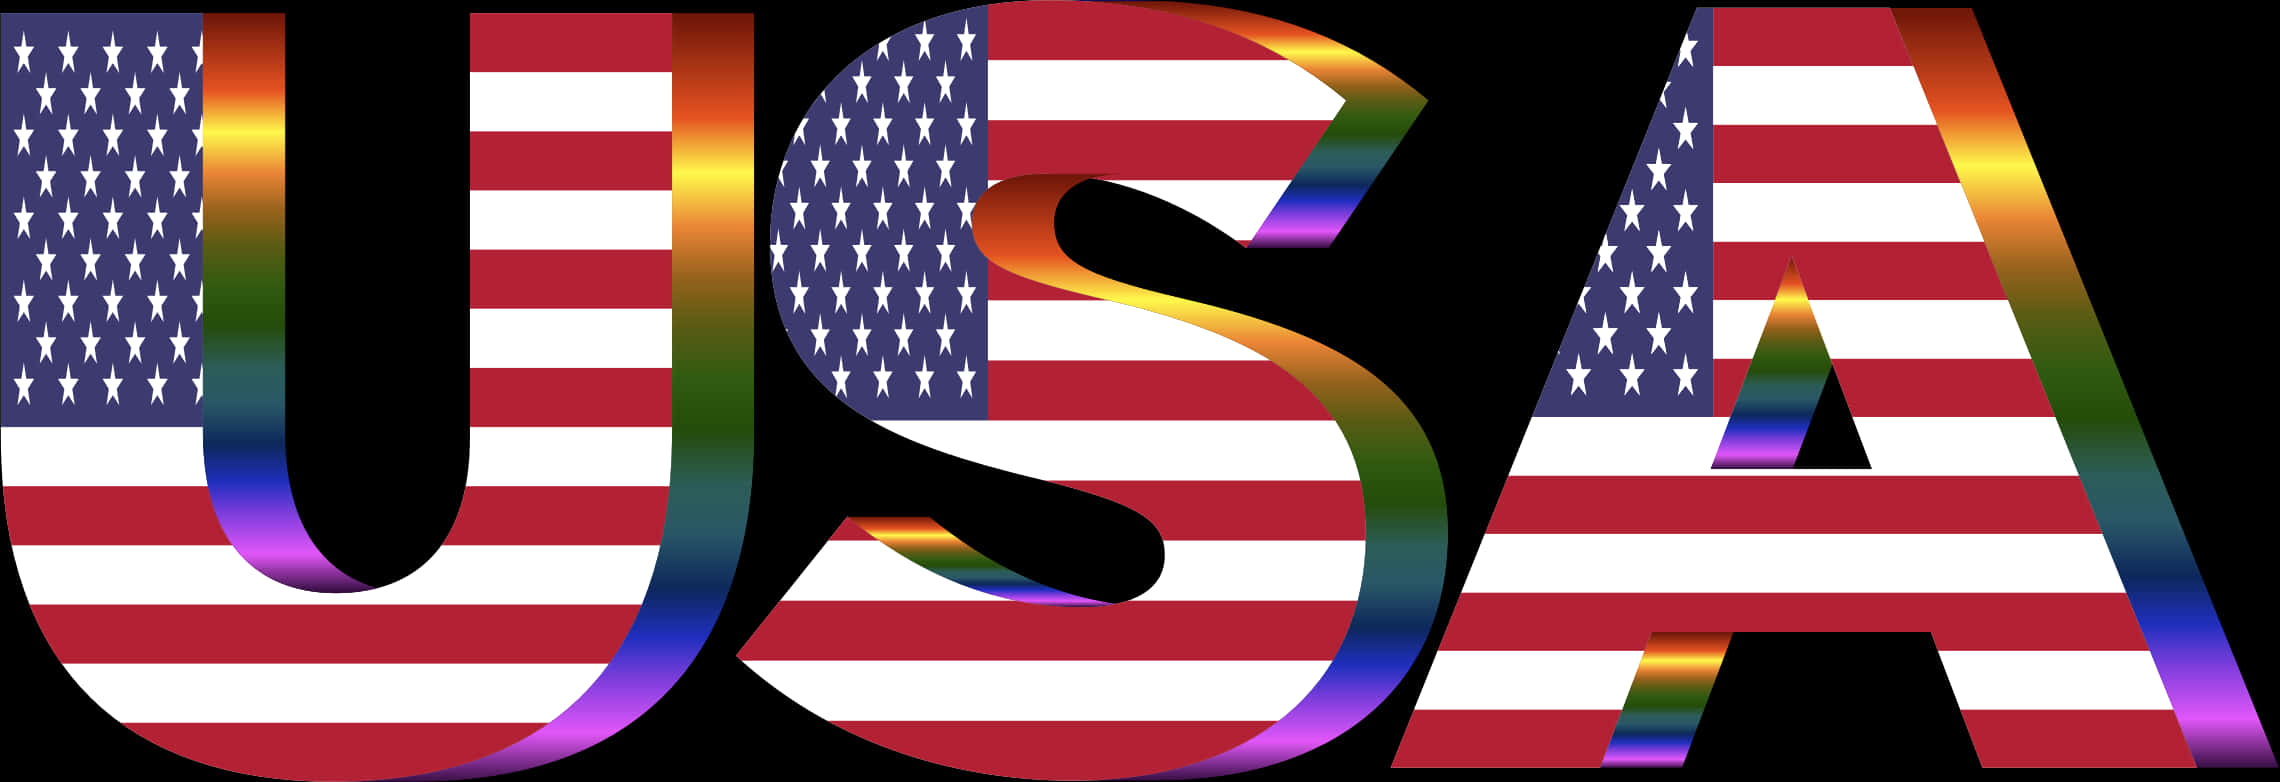 A Flag And Letters With Rainbow Colors